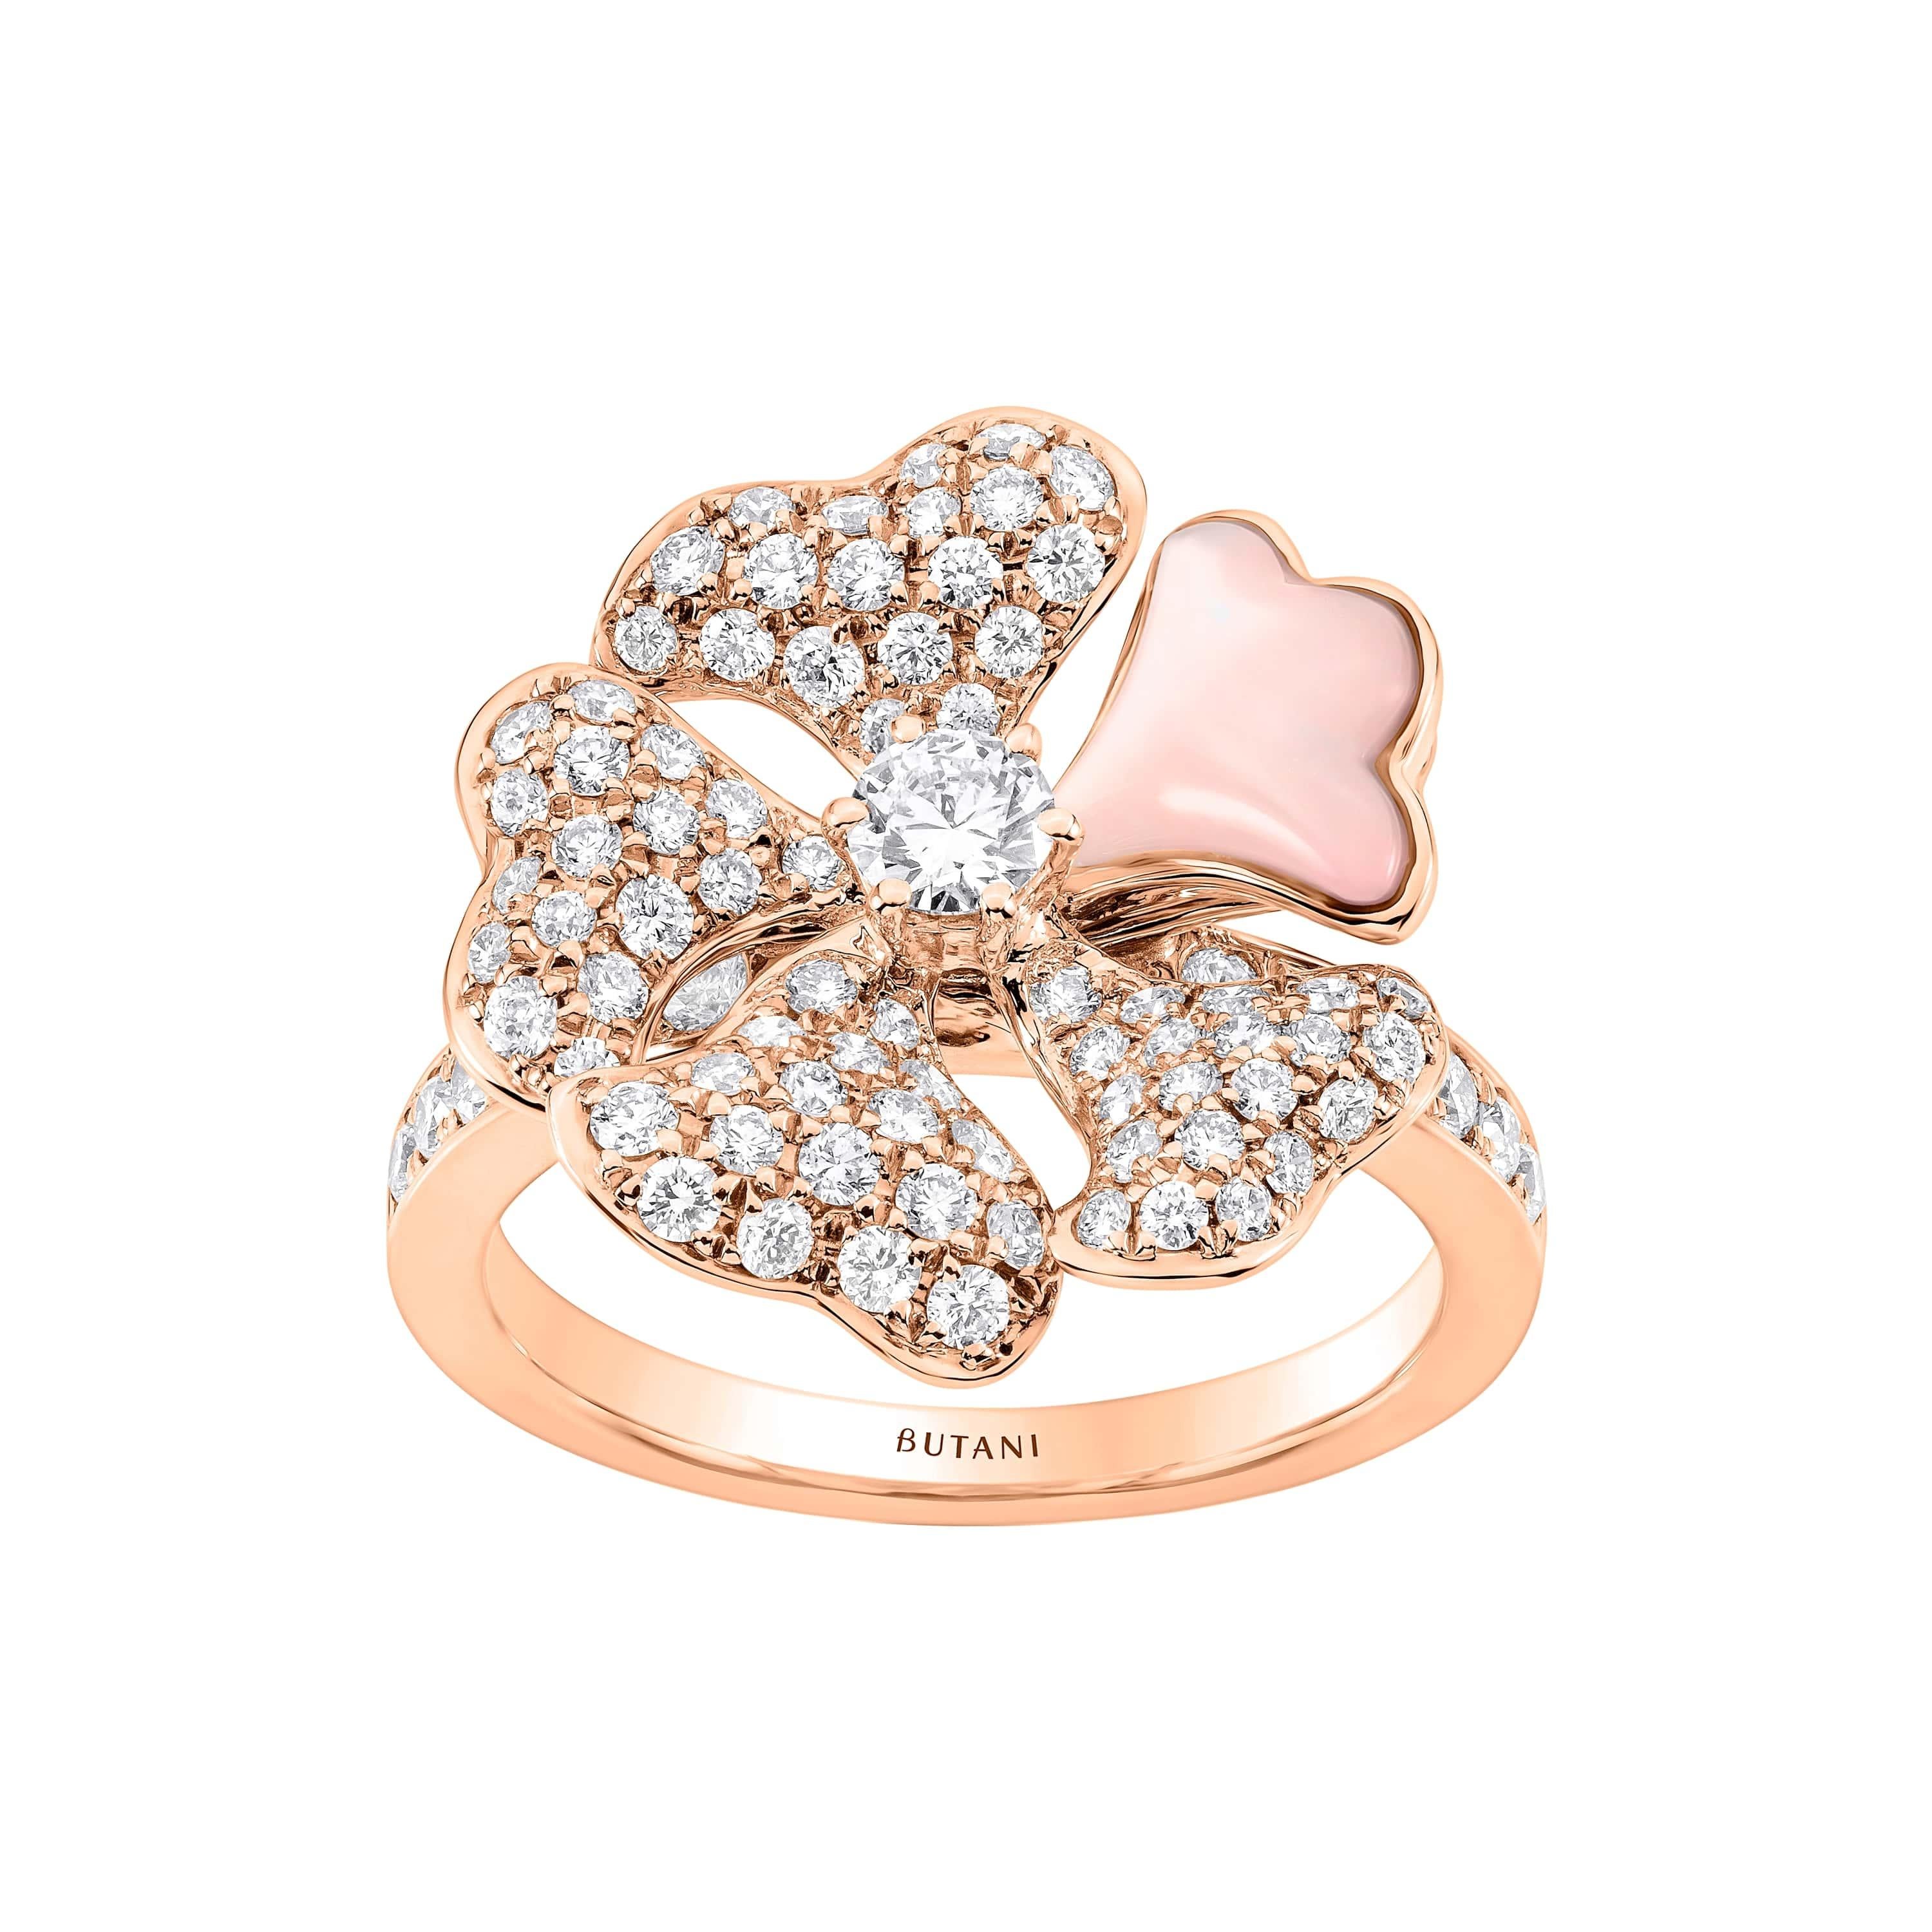 Bloom Pink Mother-of-Pearl and Pavé Diamond Ring in 18K Rose Gold

Inspired by the exquisite petals of the alpine cinquefoil flower, the Bloom collection combines the richness of diamonds and precious metals with the light versatility of this